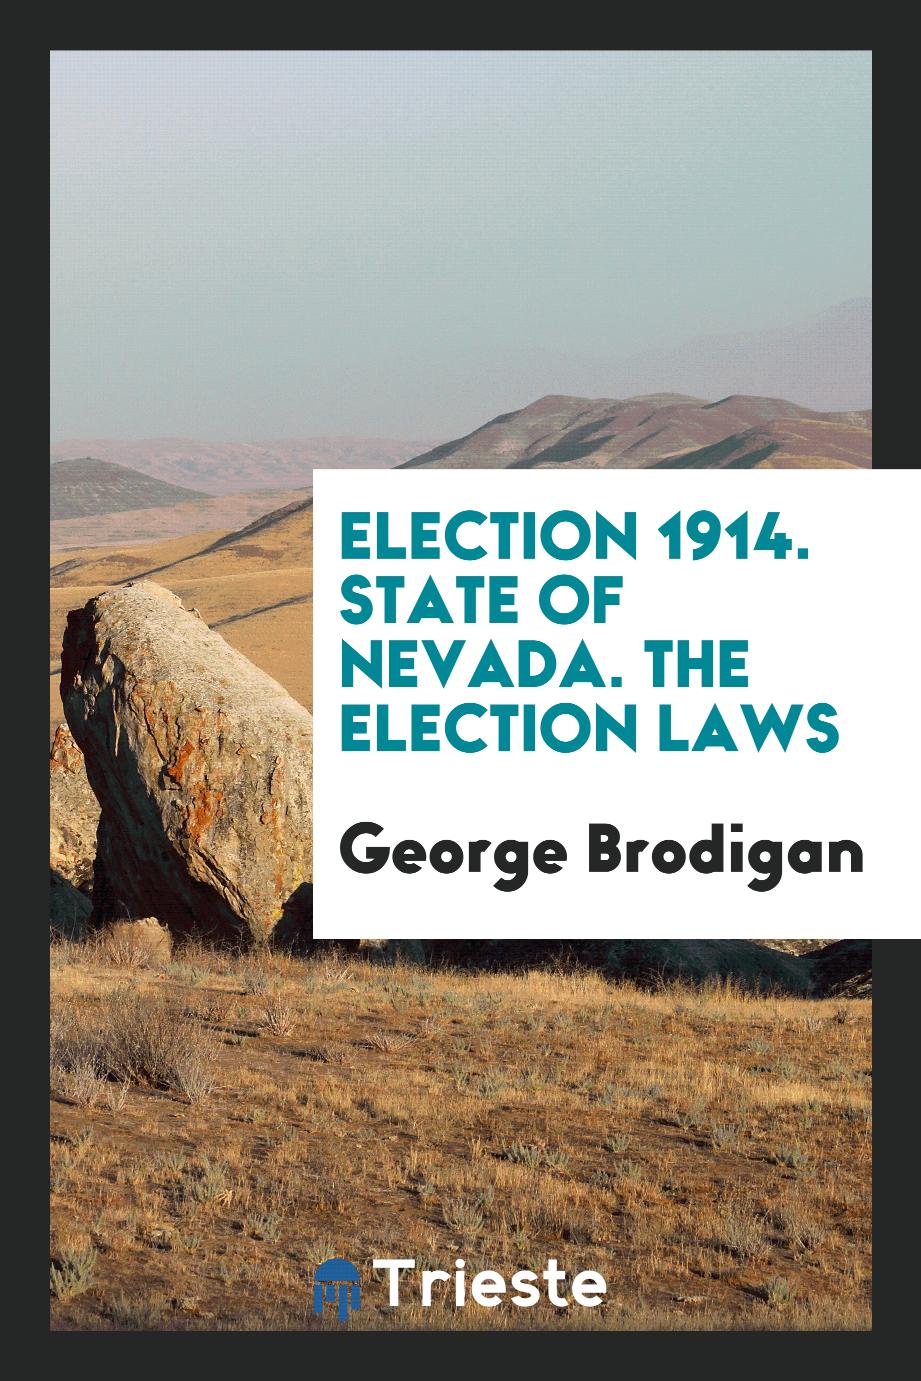 Election 1914. State of Nevada. The Election Laws